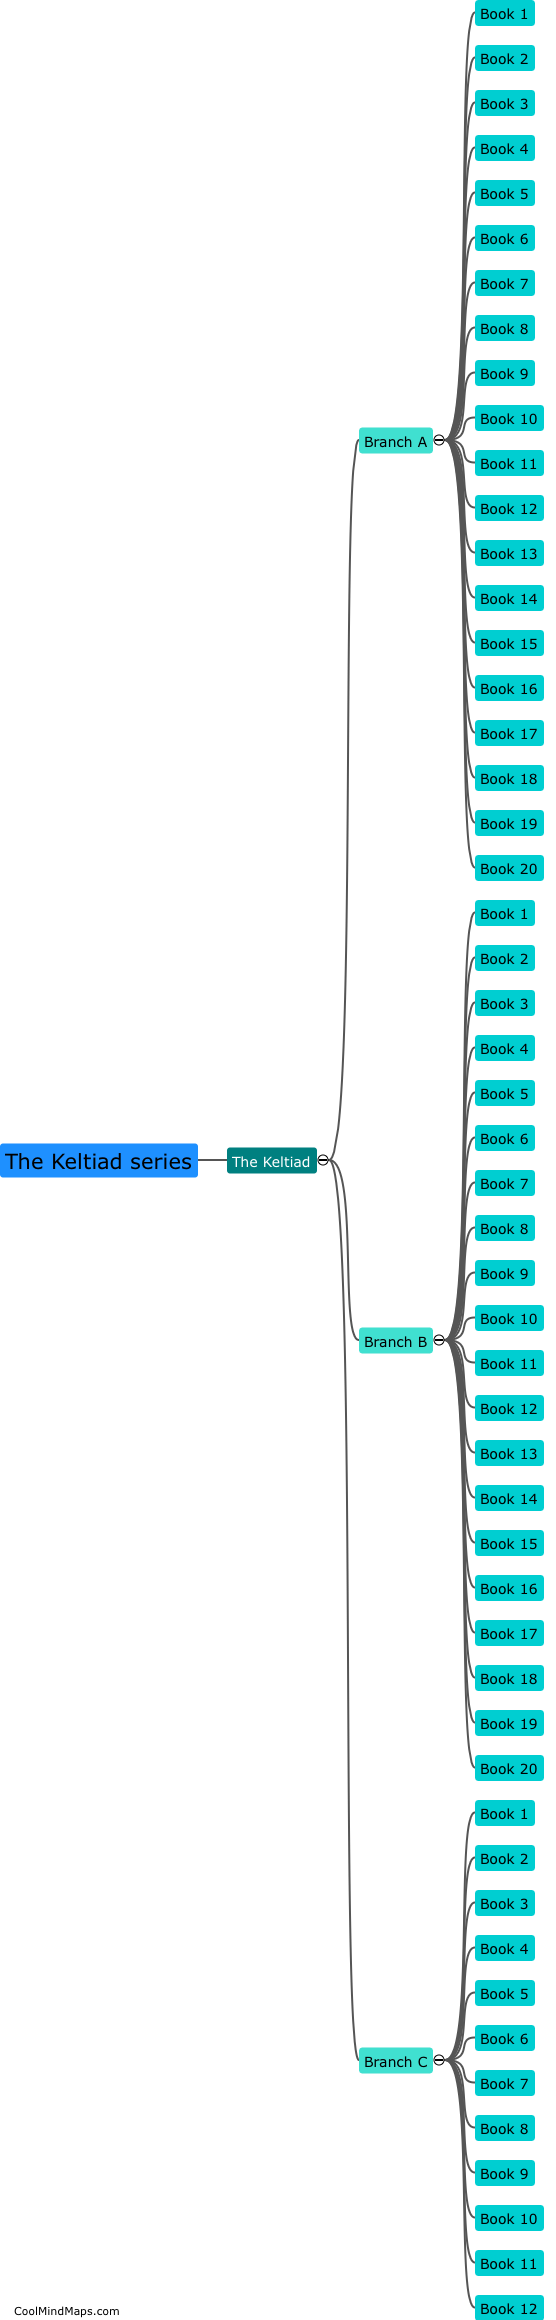 What is the chronological order of The Keltiad series?